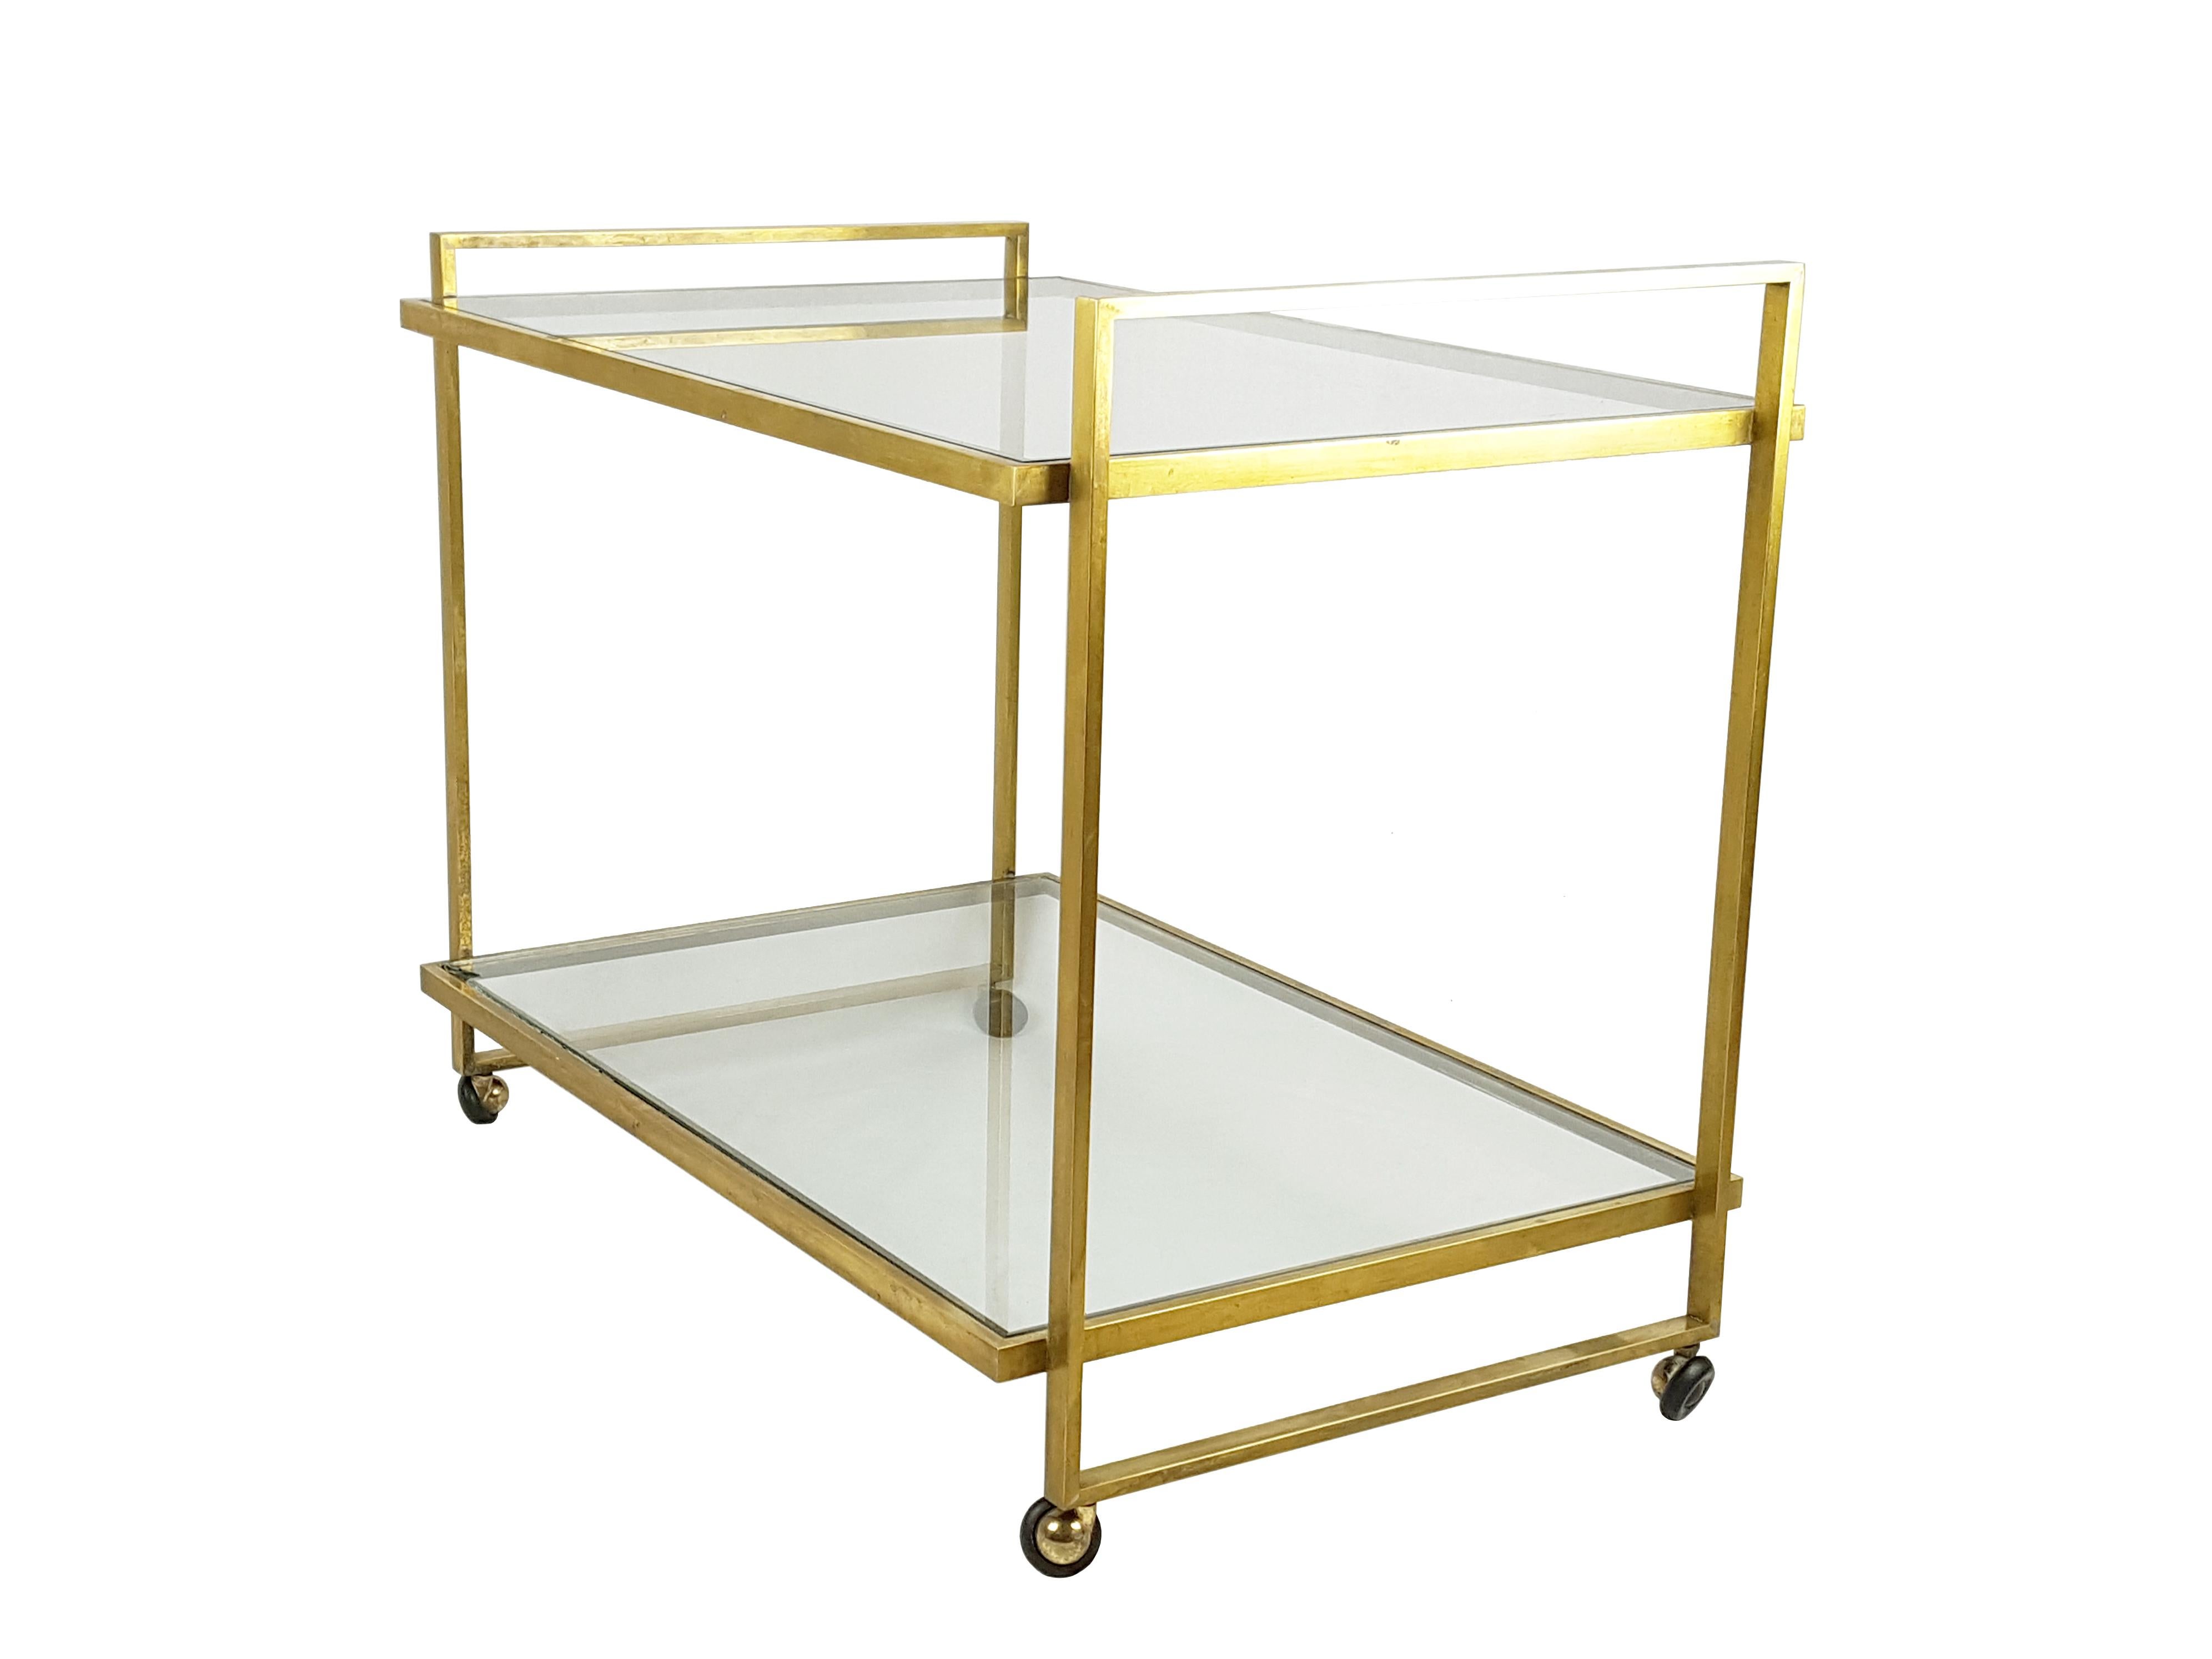 This vintage serving cart was manufactured in Italy in the 1970s. Its design is very minimal: the structure is made up by 4 brass frames welded together and by 2 glass shelves. It remains in a very good condition: patina on the brass frames due to